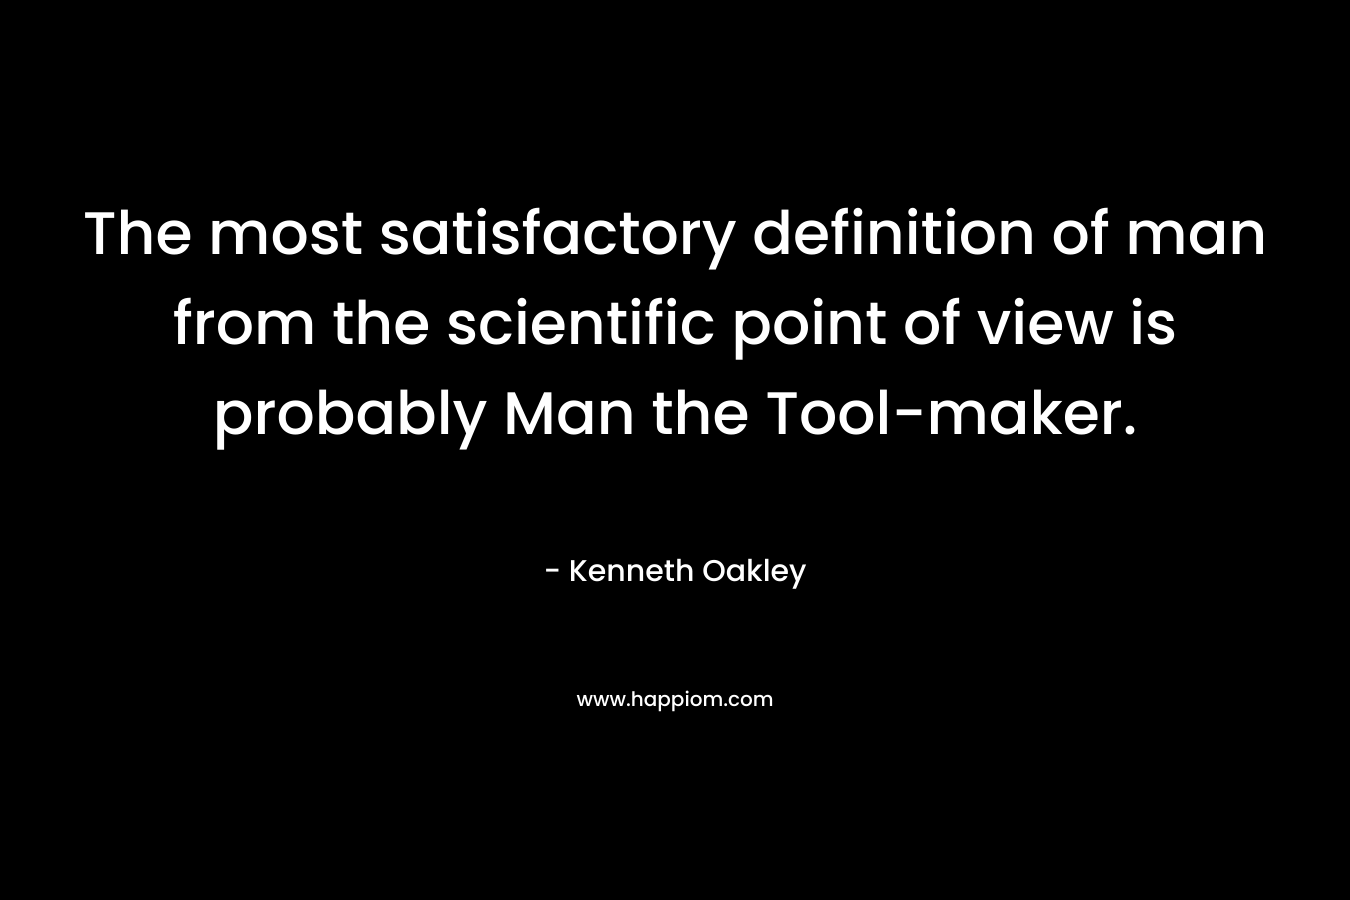 The most satisfactory definition of man from the scientific point of view is probably Man the Tool-maker. – Kenneth Oakley